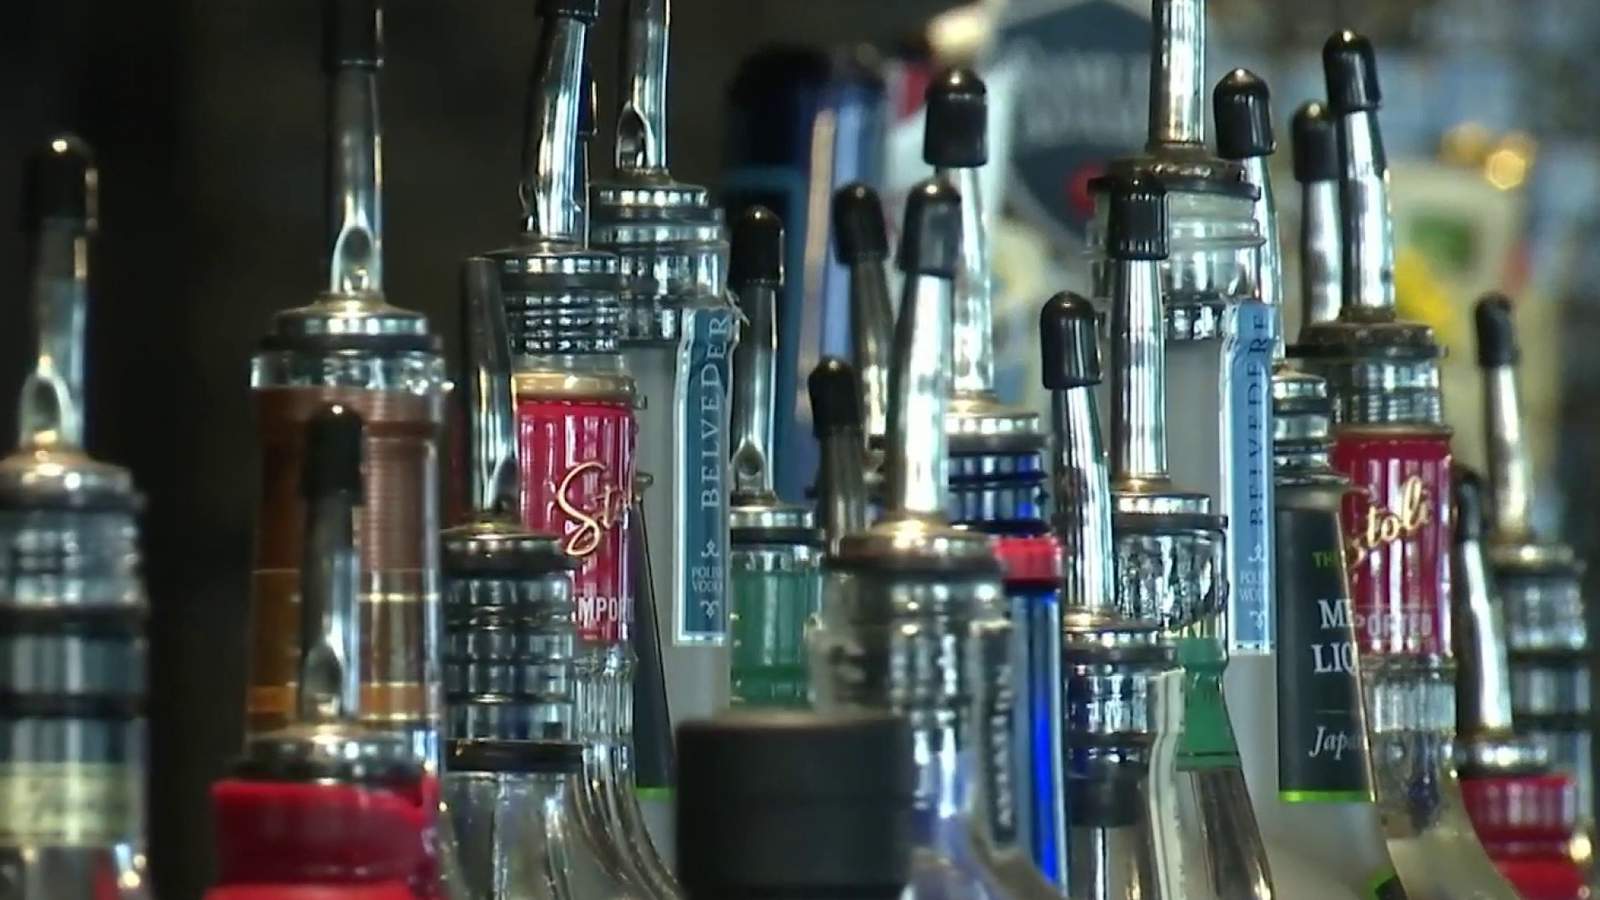 ‘People are much wiser:’ Bar owners hope for best behavior as they reopen